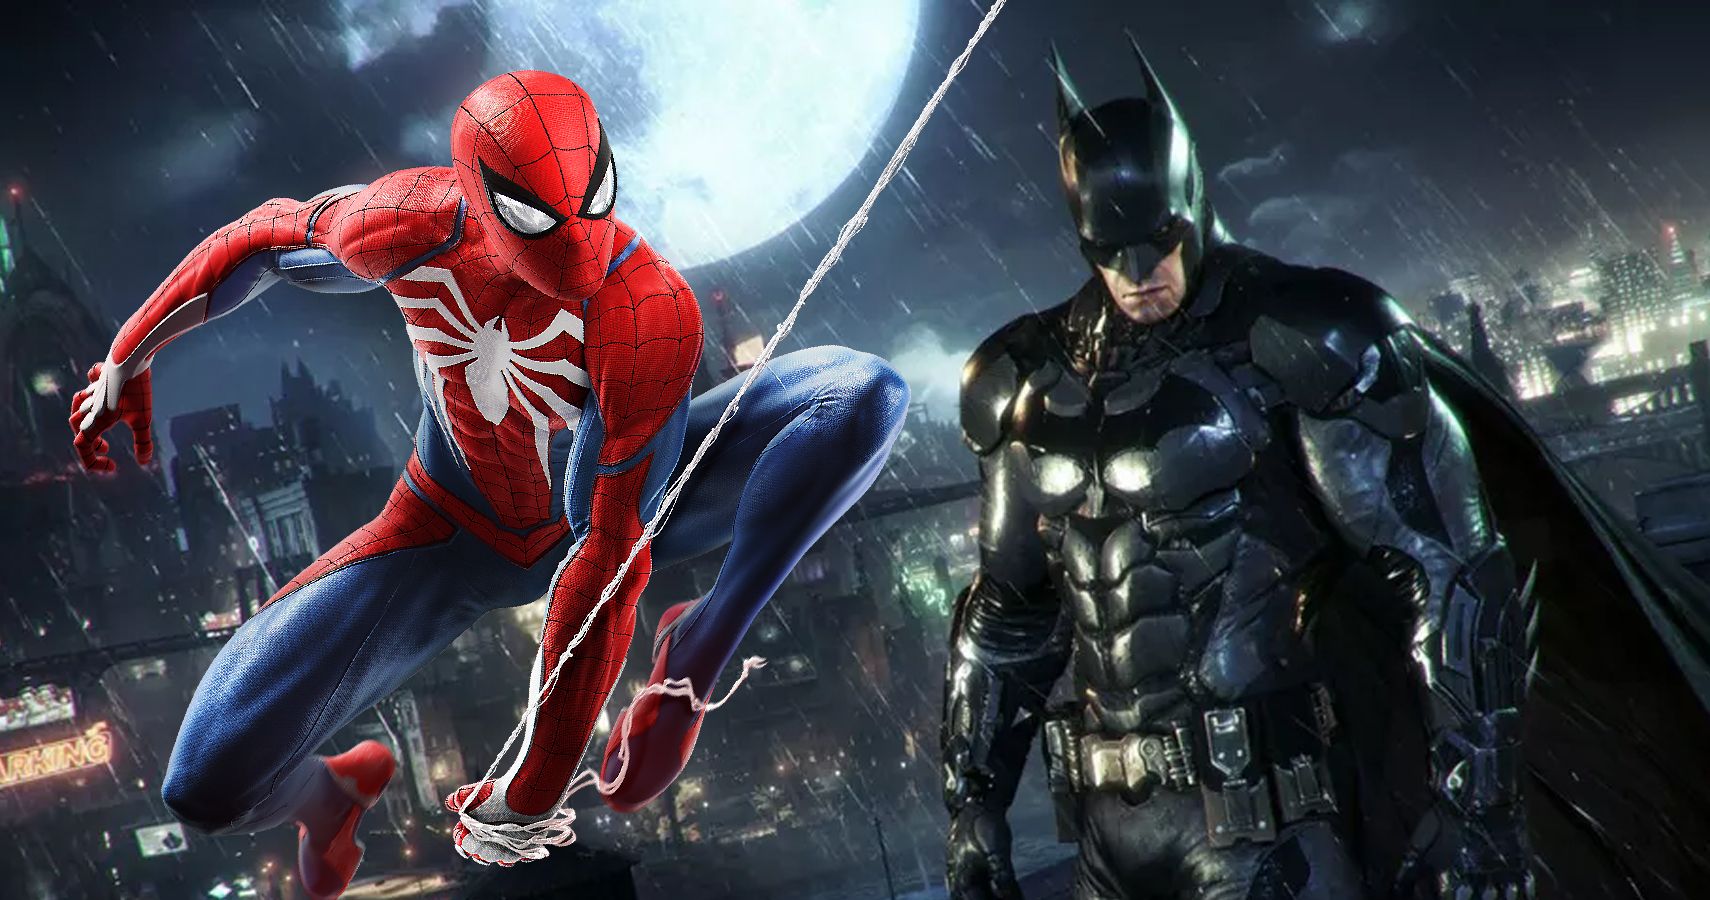 10 Best Spider-Man Video Games, Ranked According To Metacritic